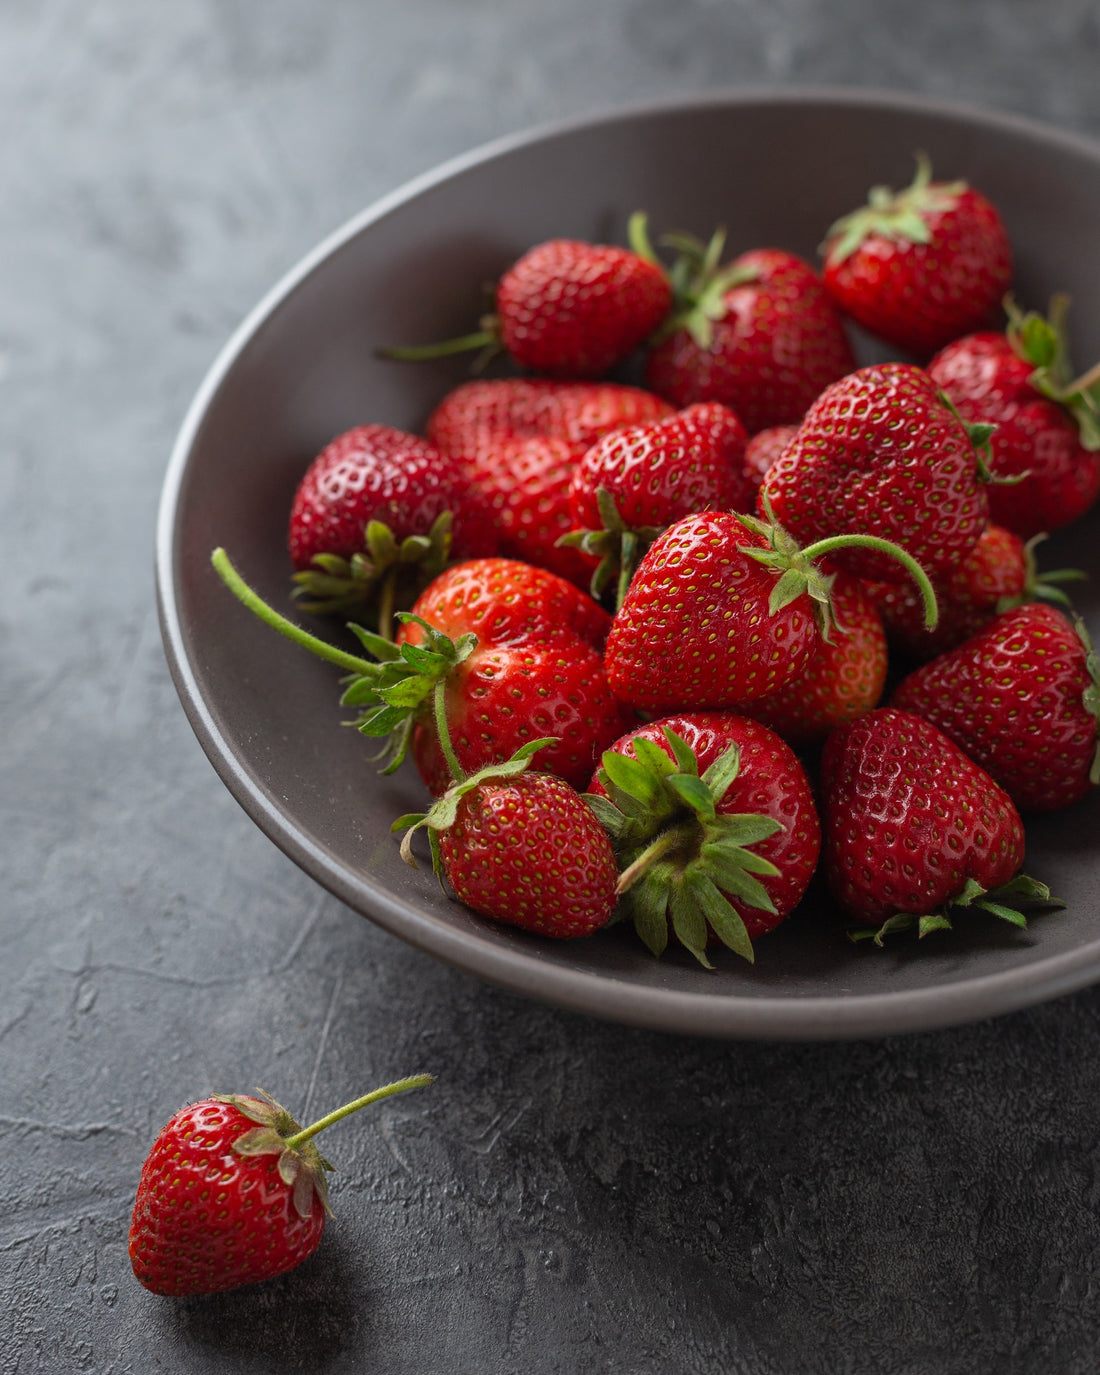 Are Strawberries Good for Diabetes